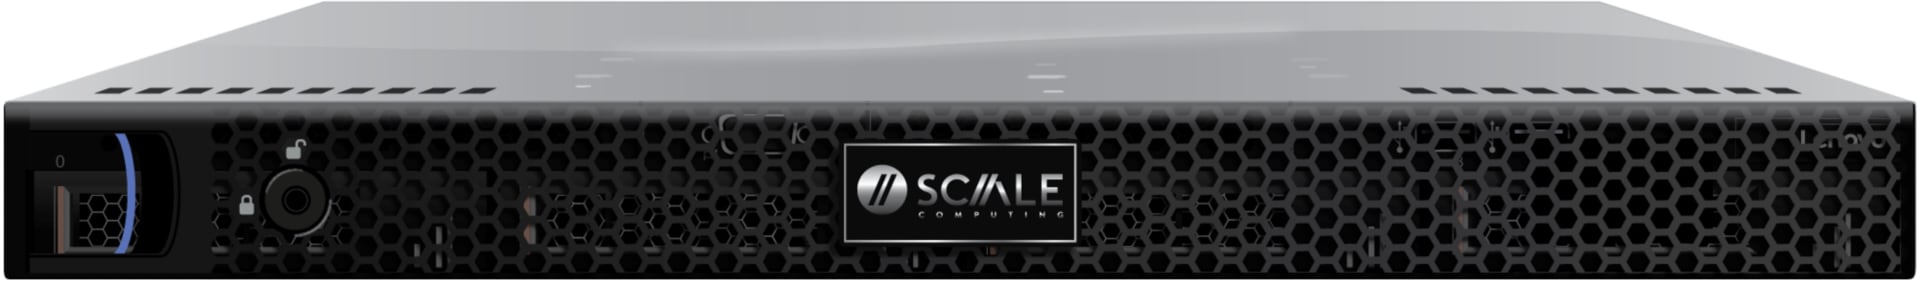 Scale Computing HC1250 Chassis